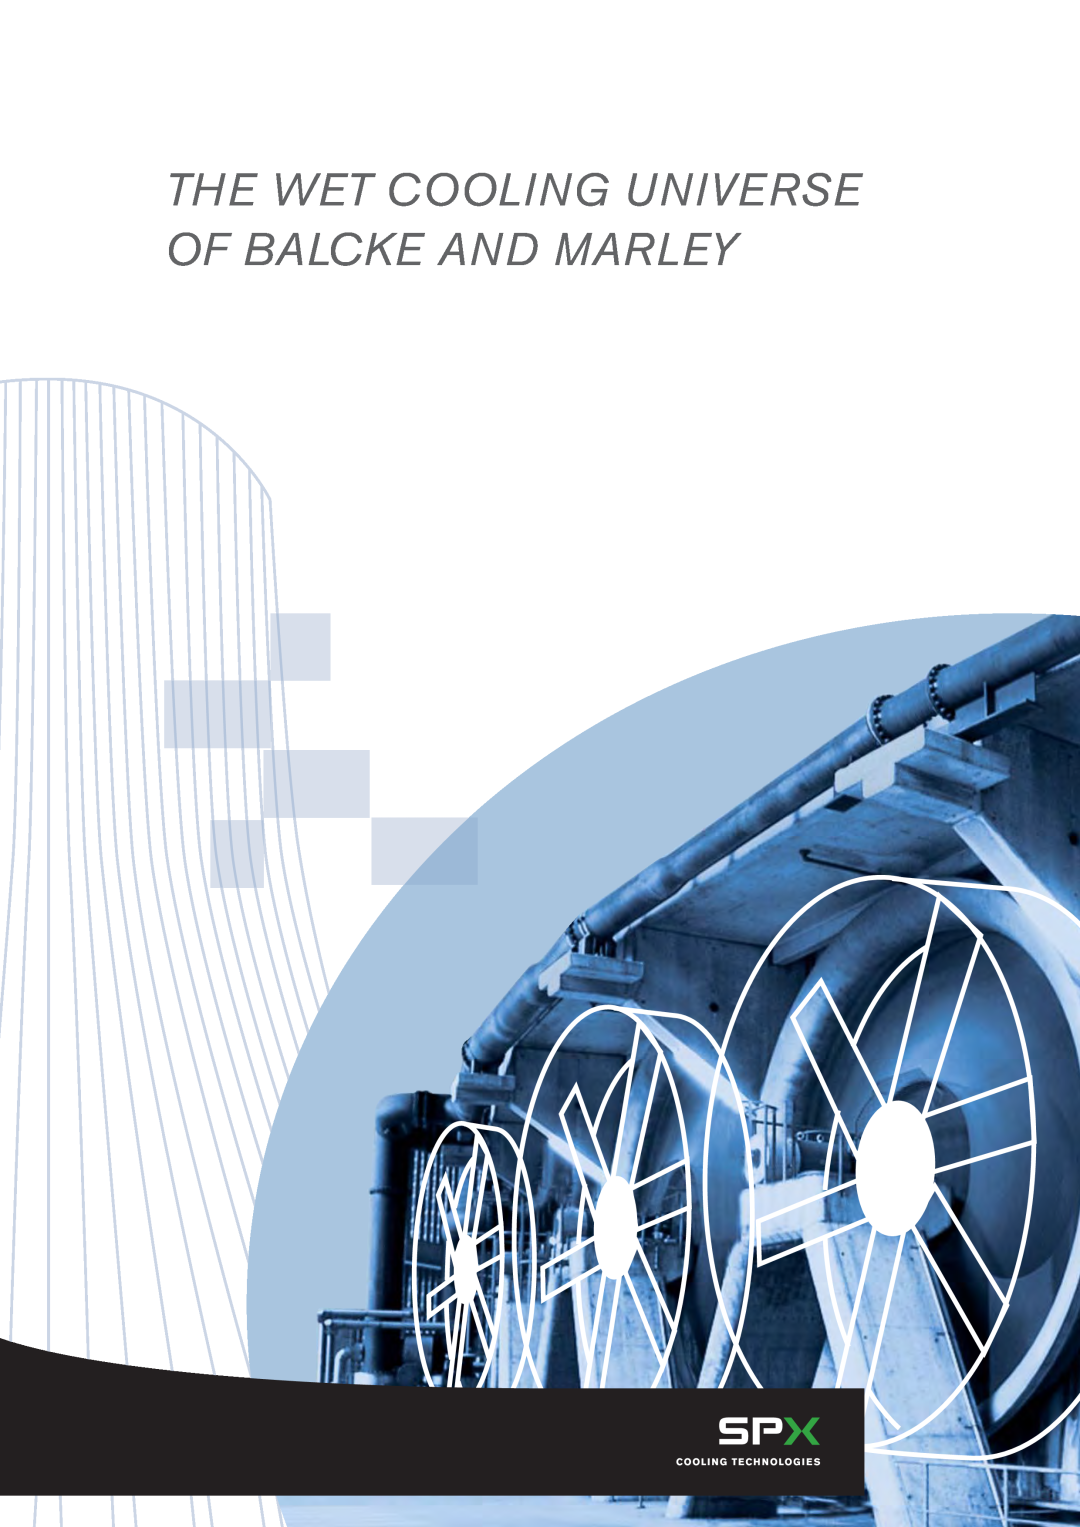 SPX Cooling Technologies BA-07011 manual The Wet Cooling Universe Of Balcke And Marley 